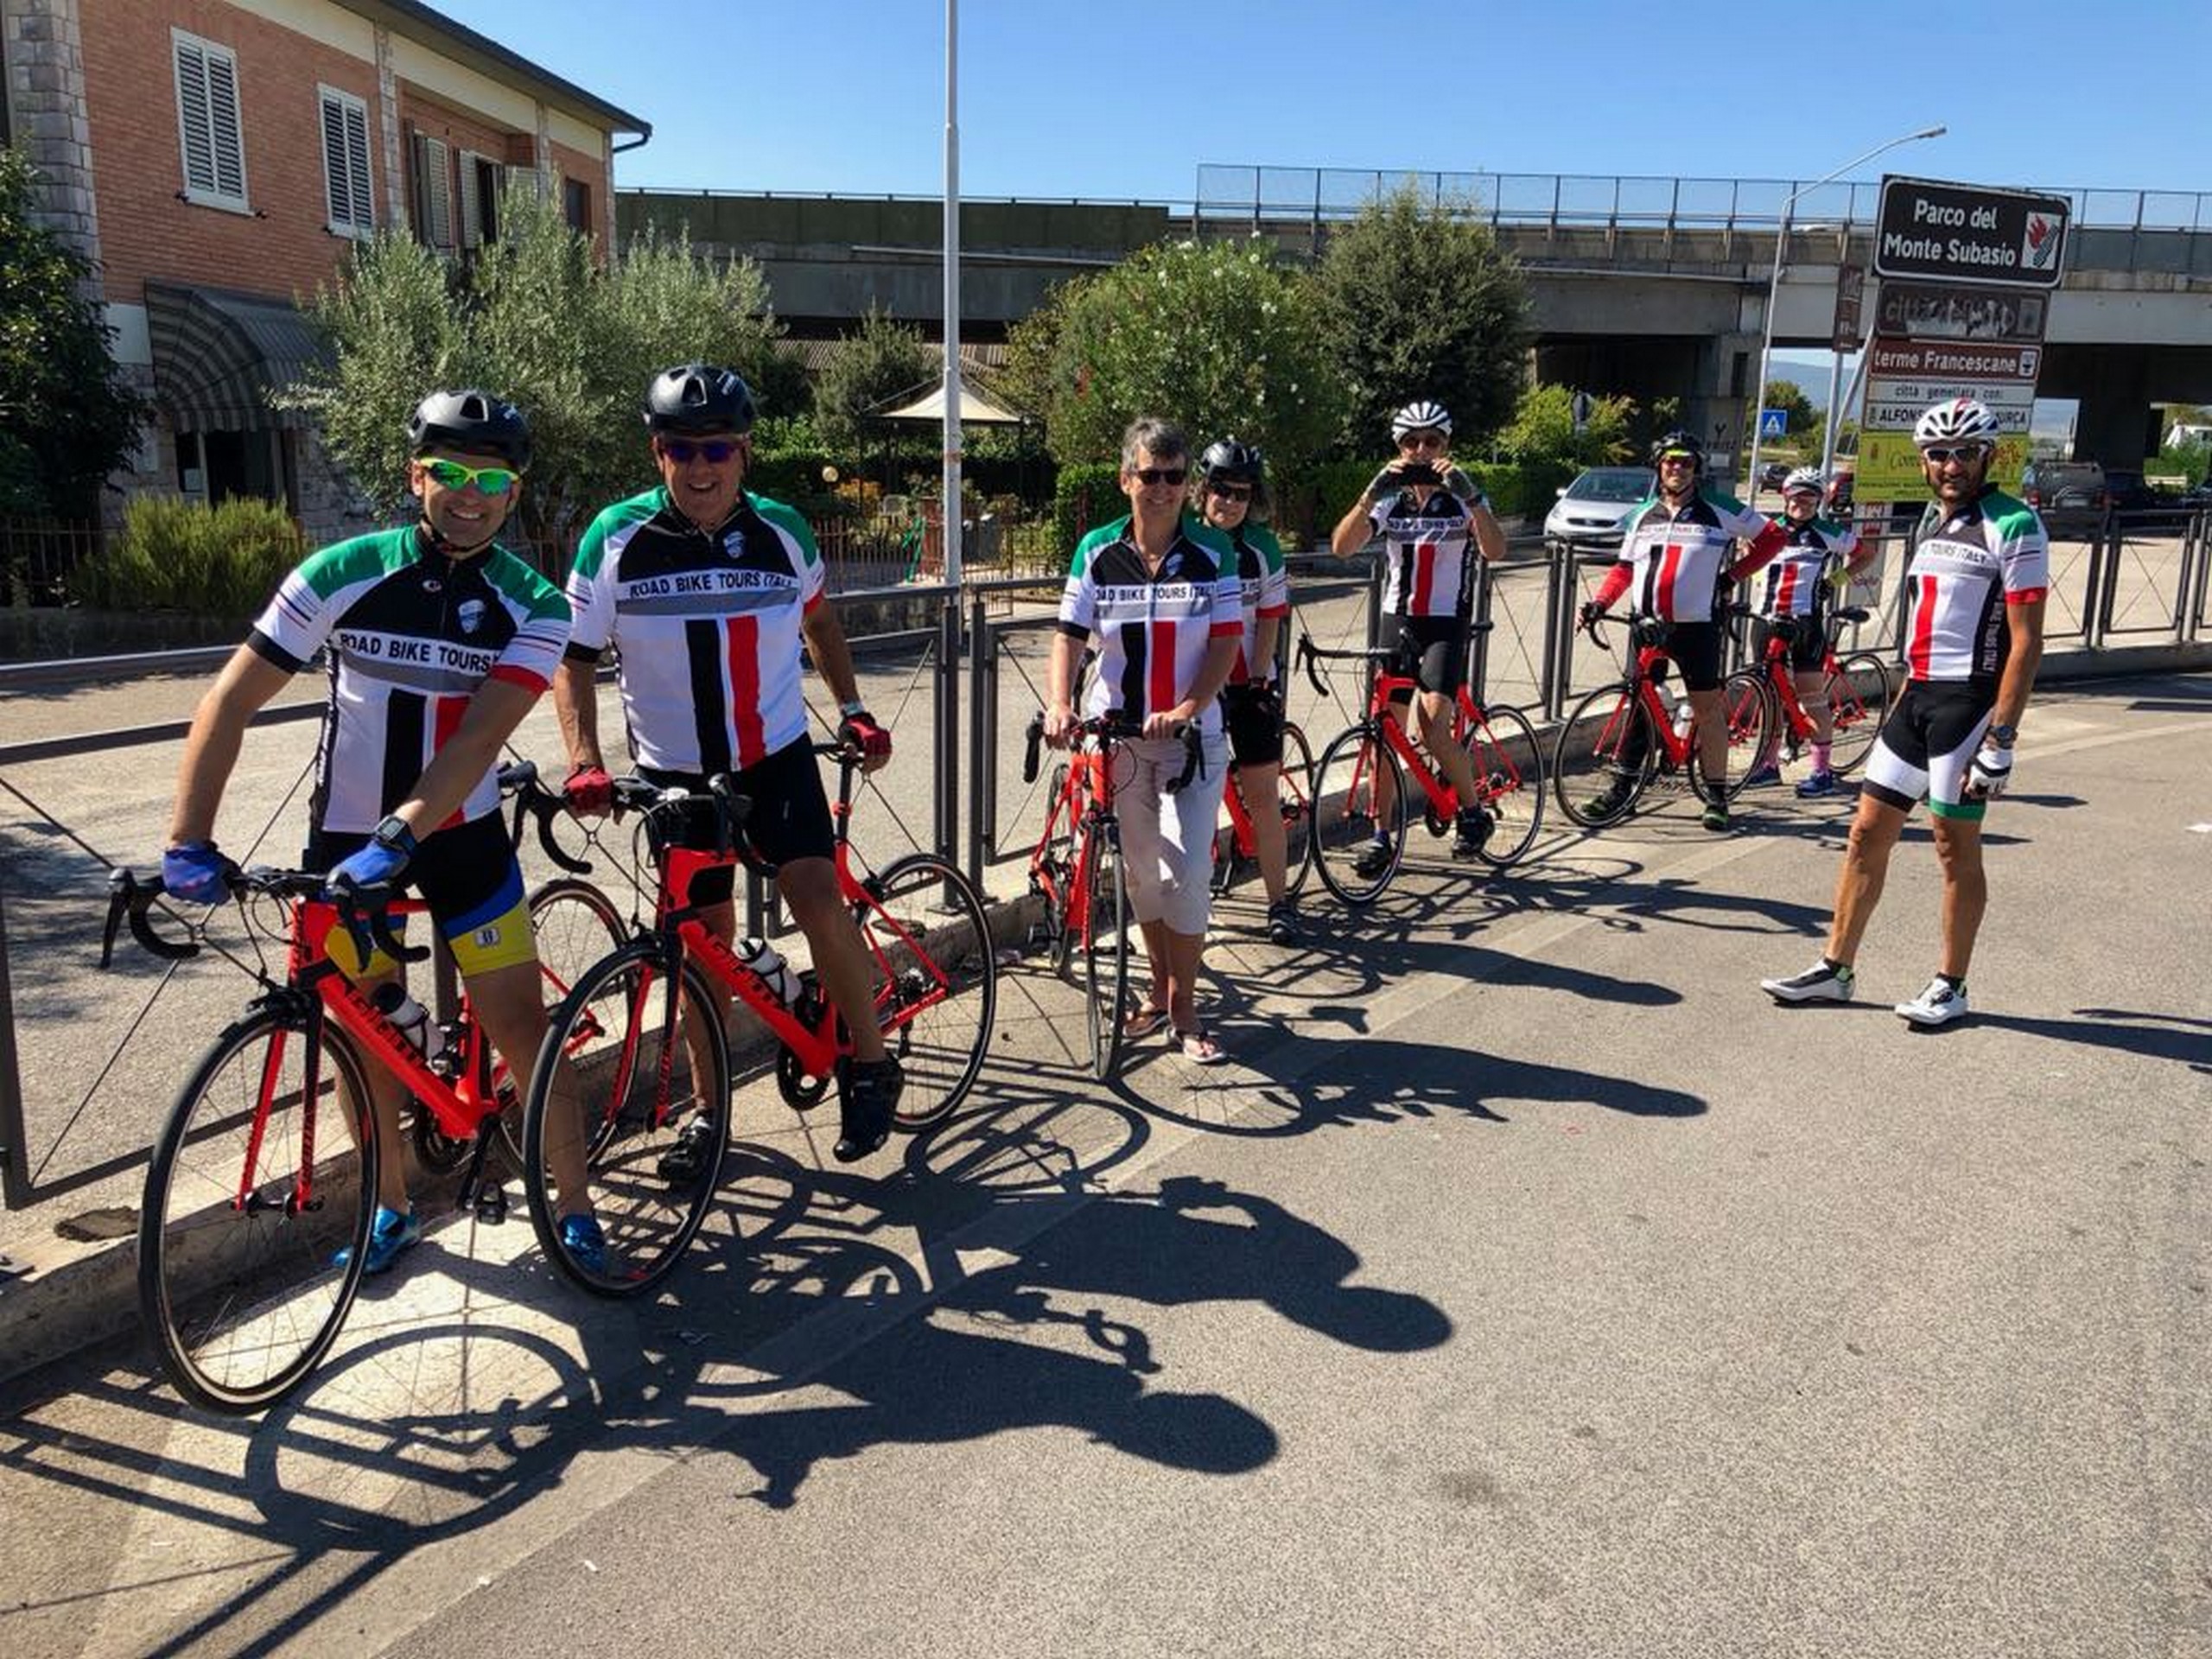 Group of cyclists on guided coast to coast tour in Italy